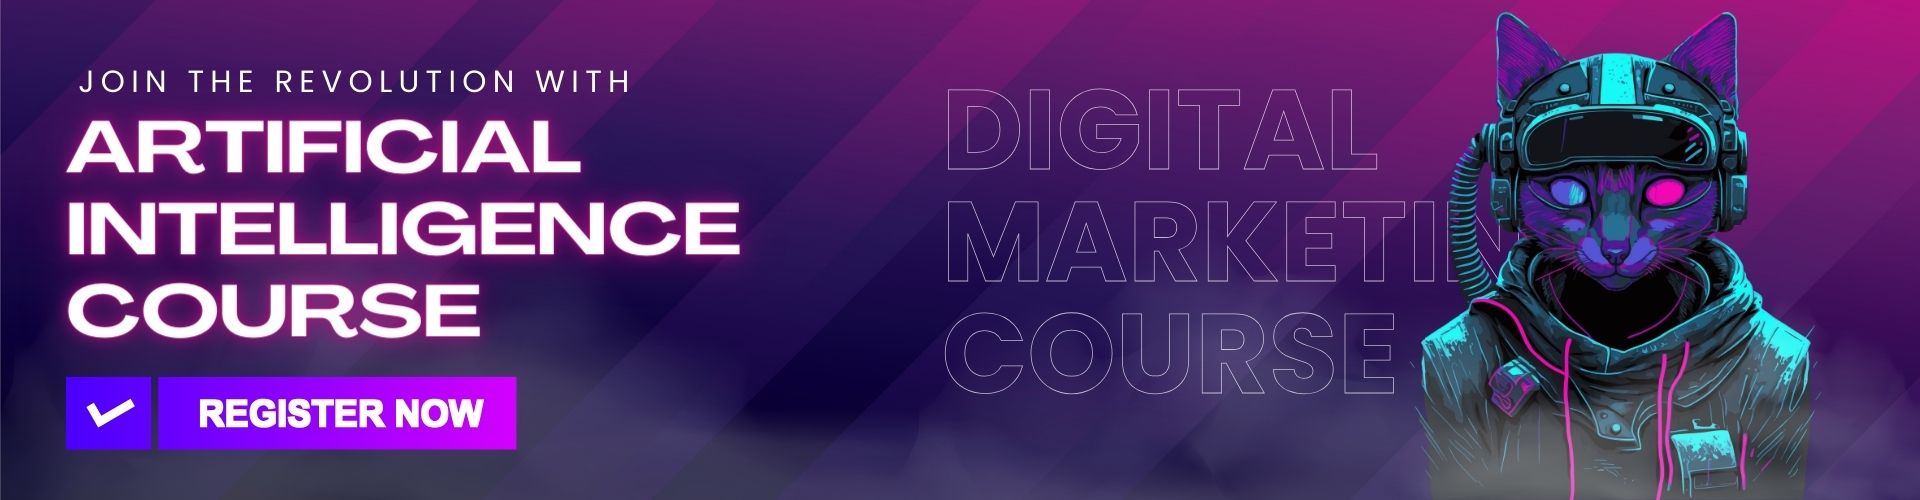 digital marketing course with certificate